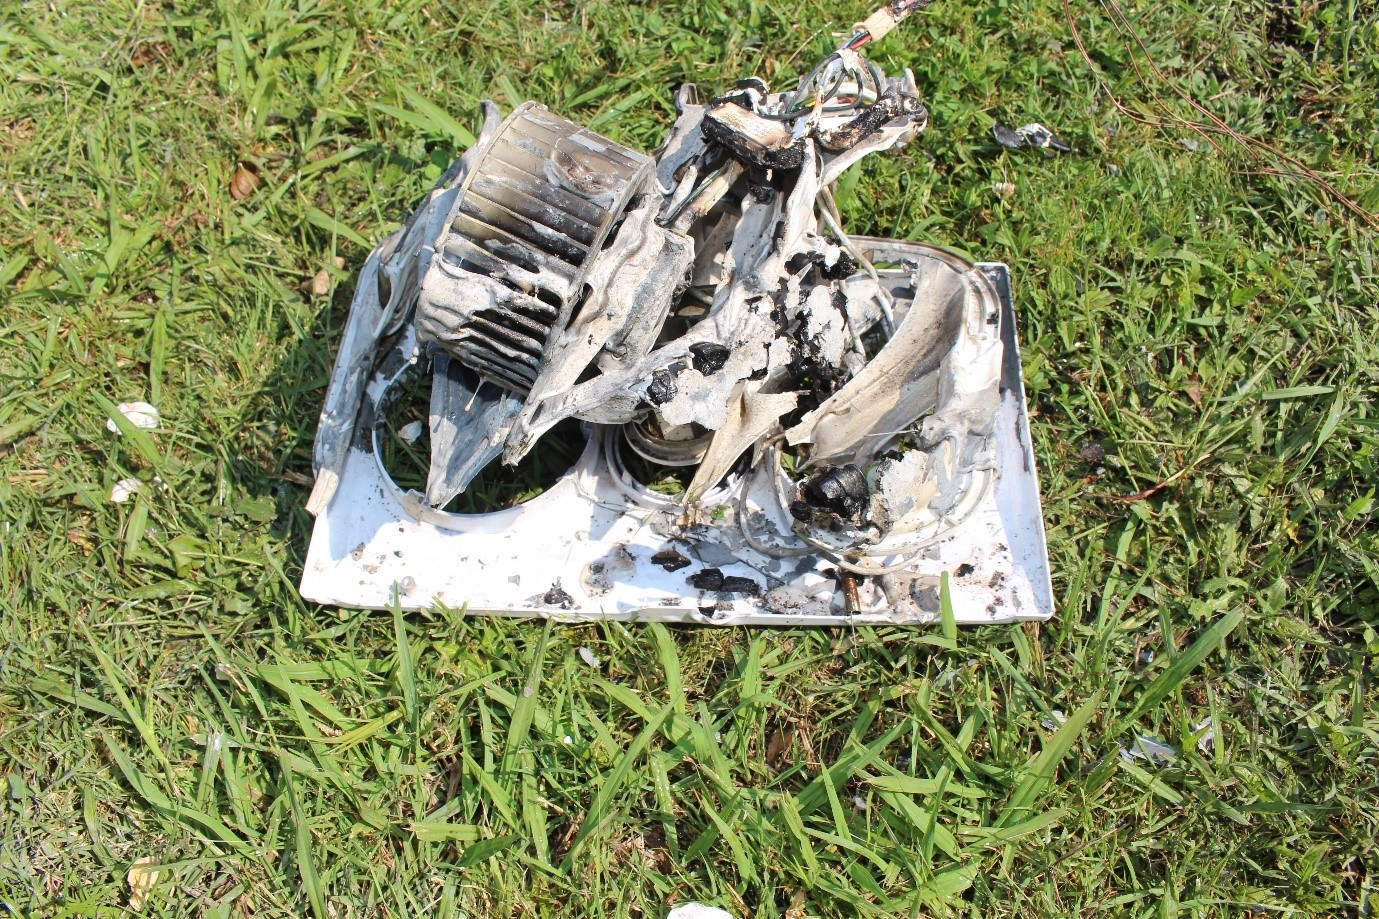 [image] a bathroom fan/light combo with substantial fire damage unit lying on the grass. 